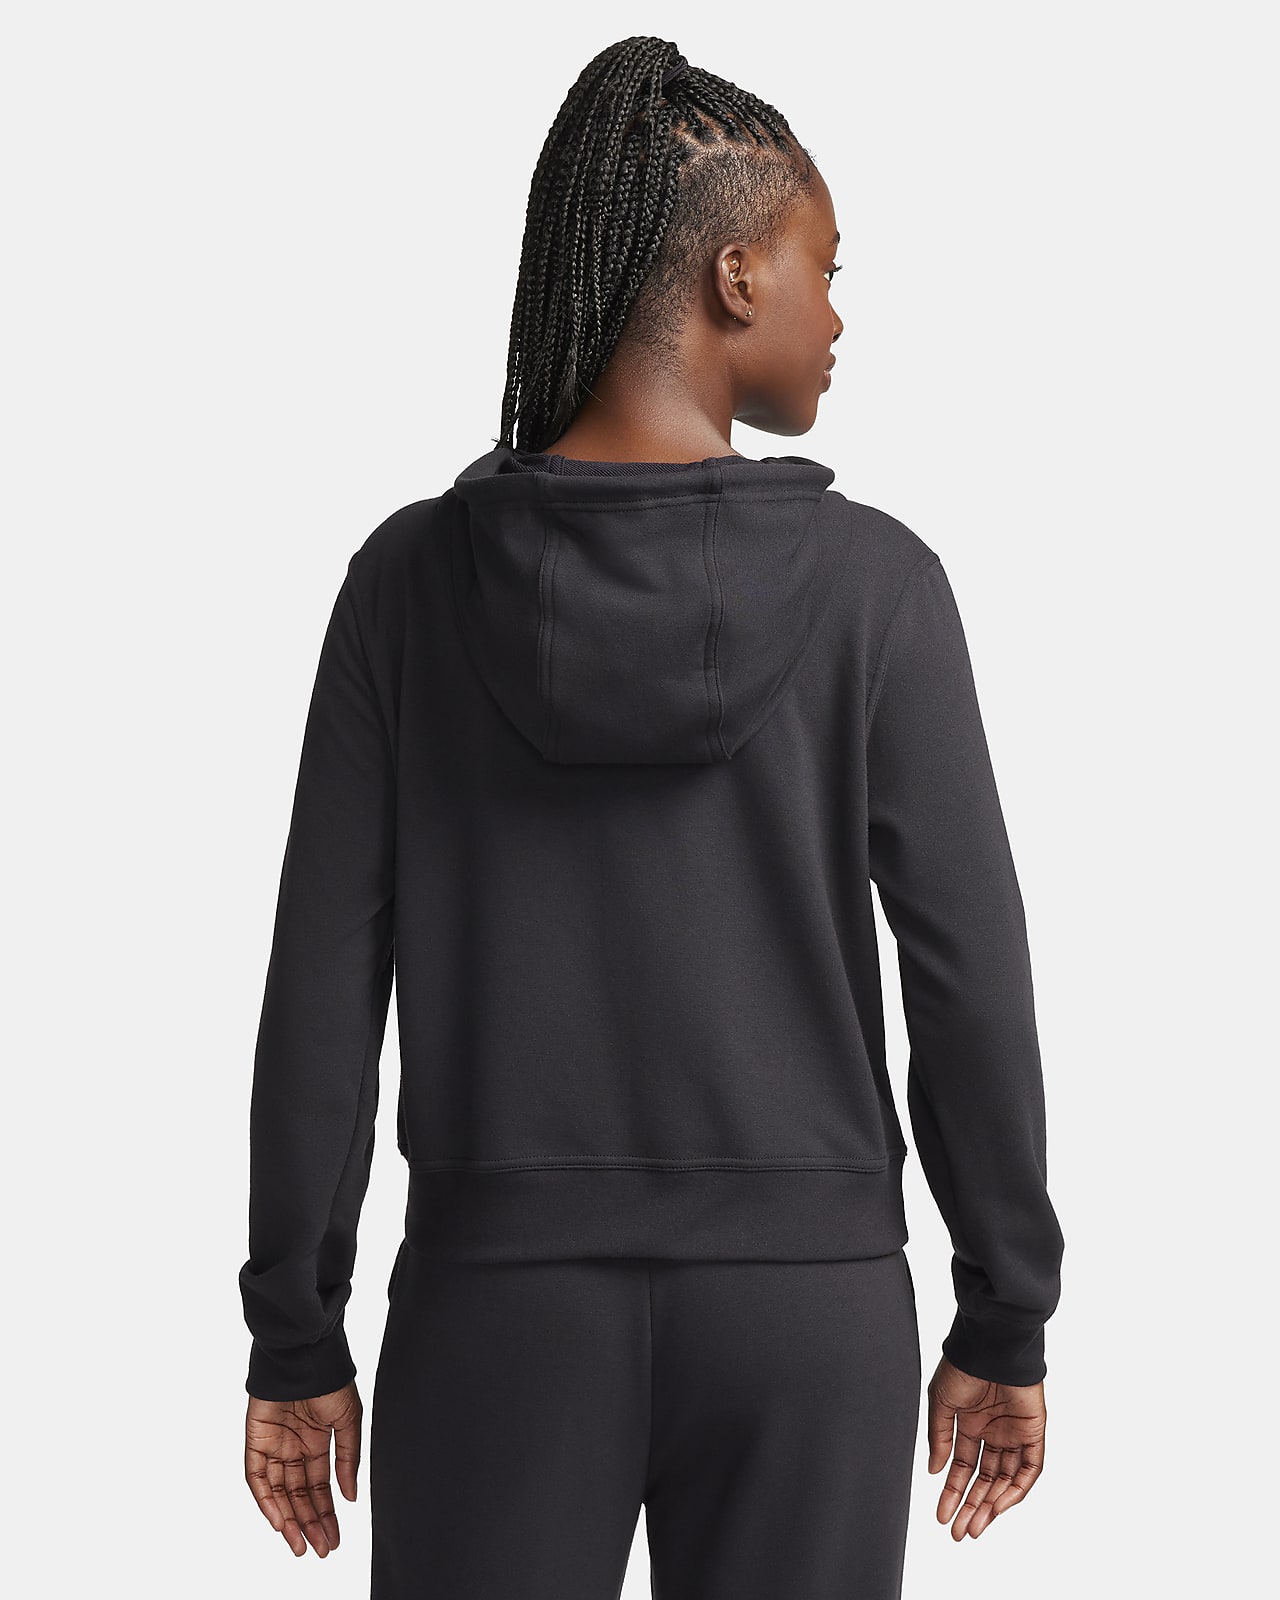 Terry One Dri-FIT Nike French Graphic Hoodie. Women\'s